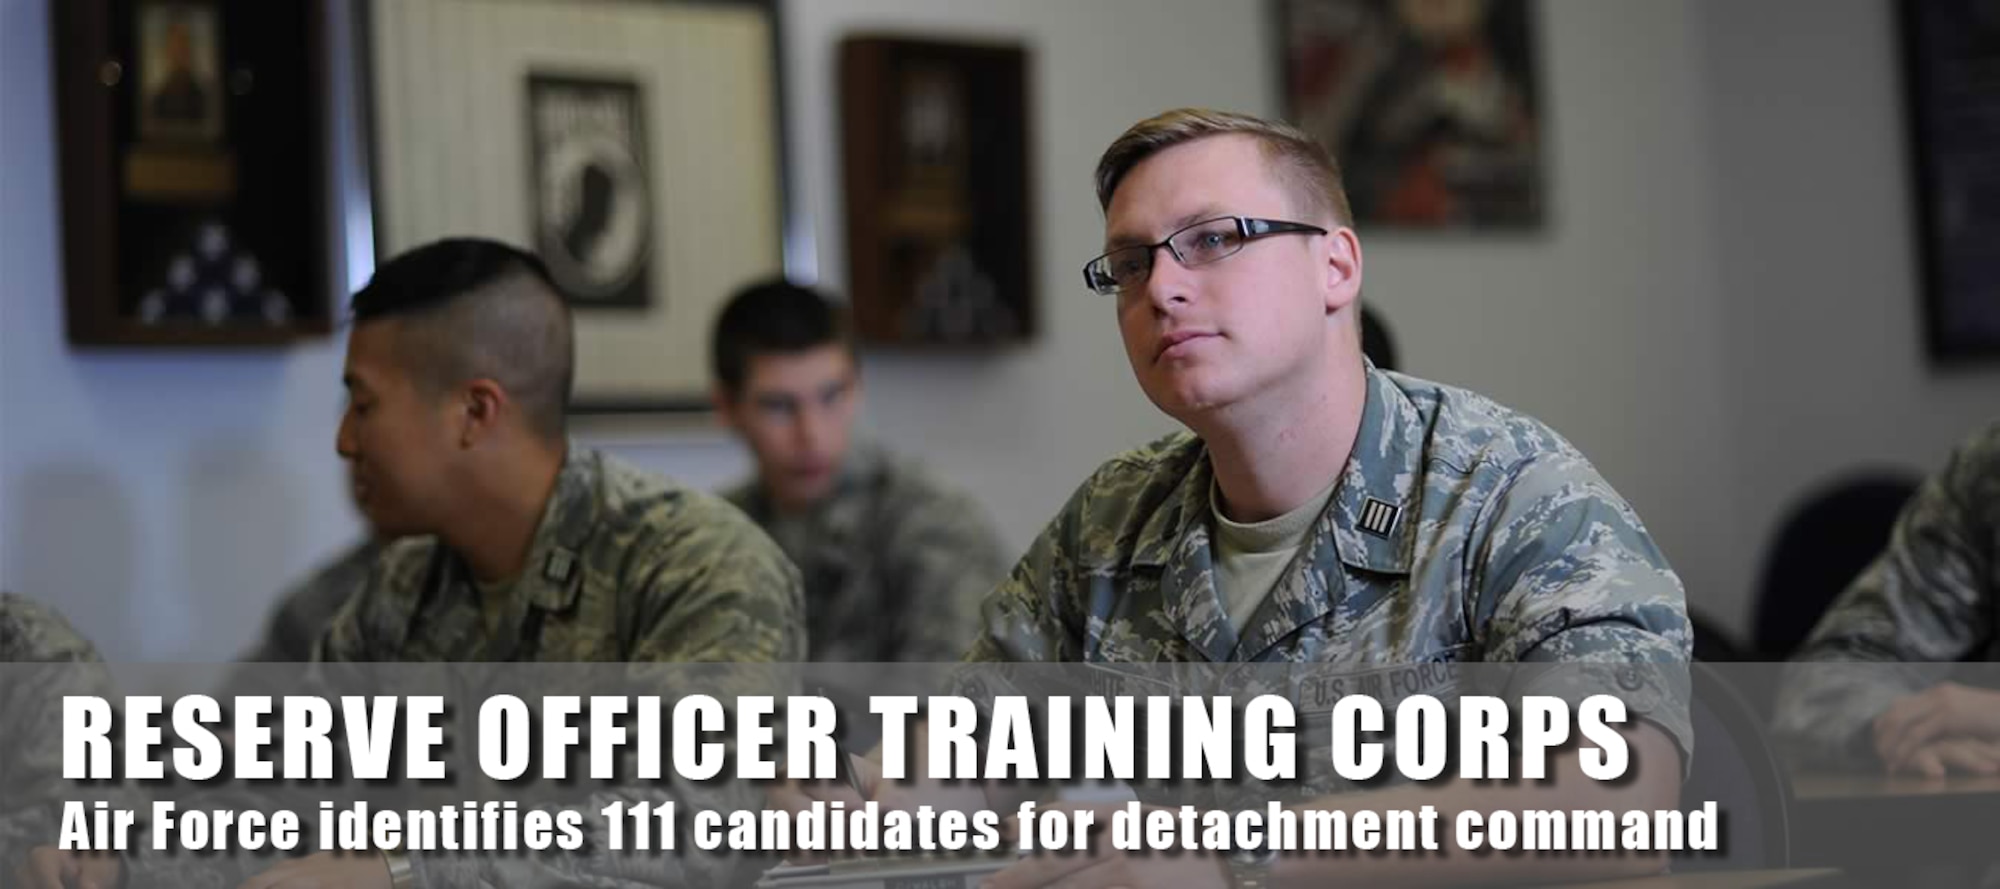 The Air Force identified 111 lieutenant colonels and lieutenant colonel-selects as candidates for Air Force Reserve Officer Training Corps detachment command. (U.S. Air Force Reserve Officer Training Corps photo).